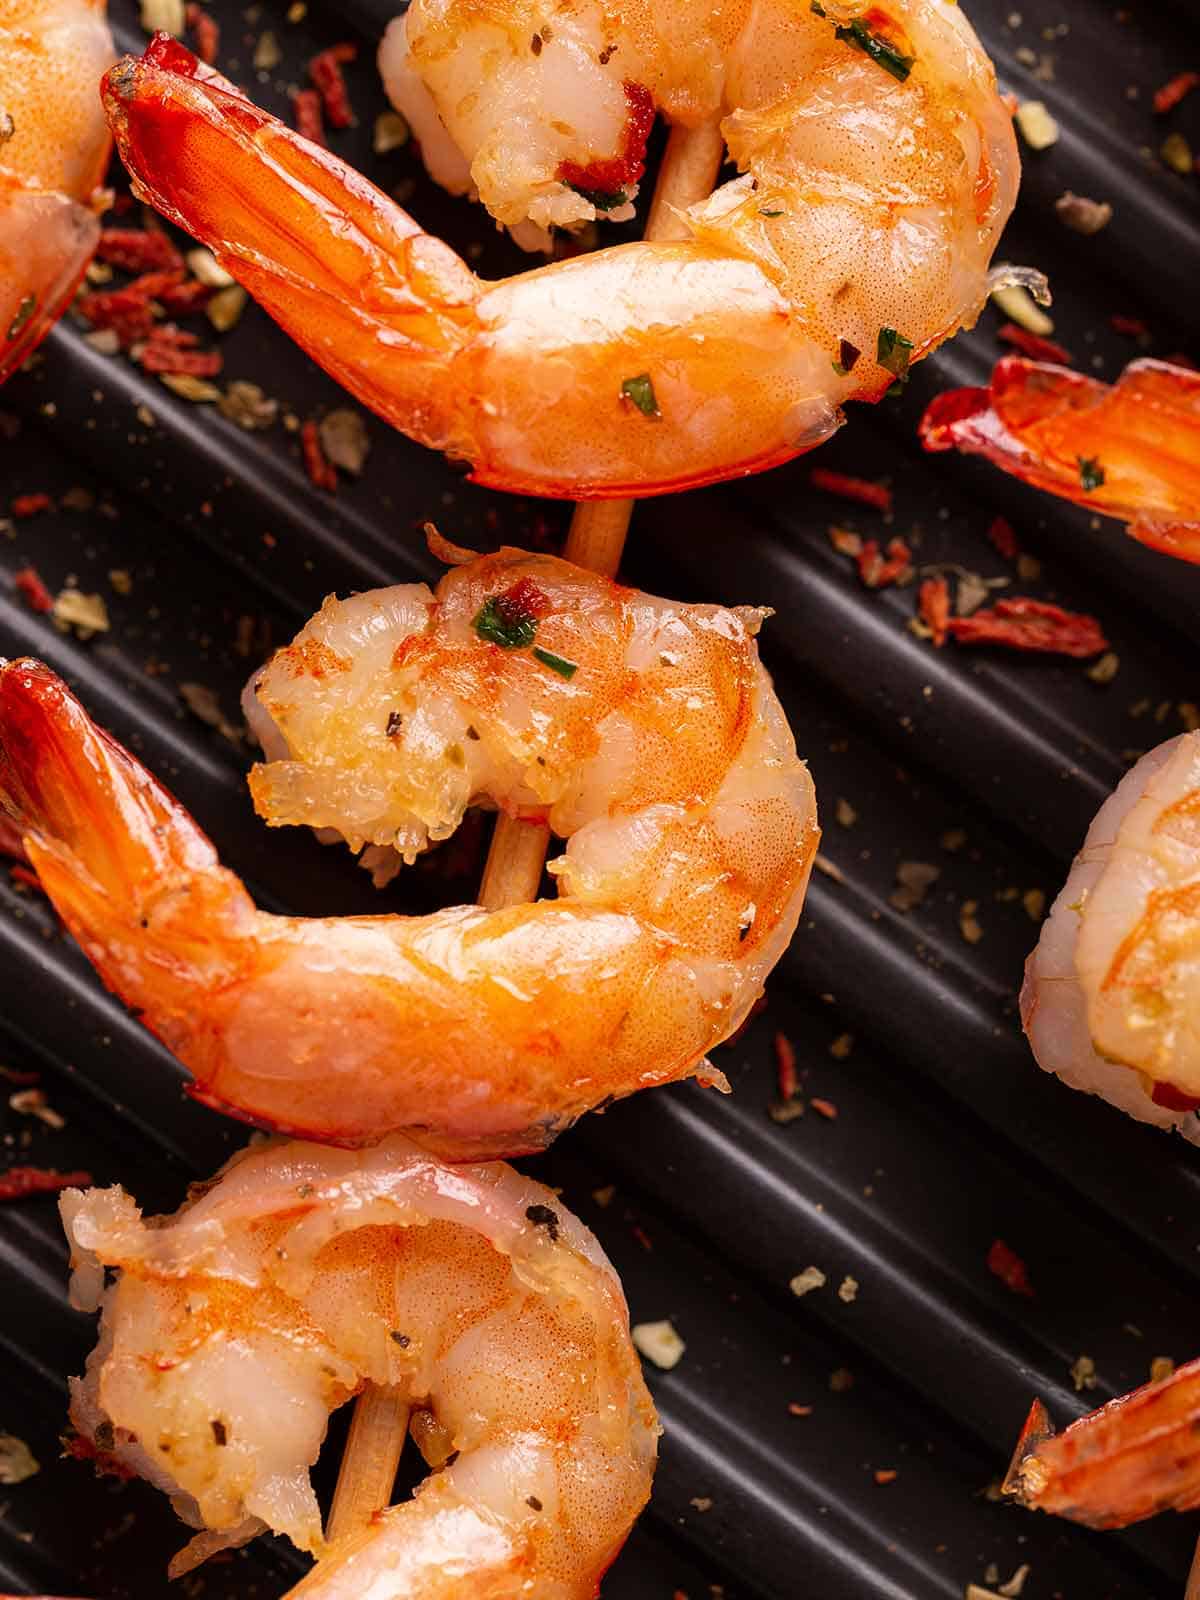 How to Cook Shrimp: perfect way to cook Shrimp everytime